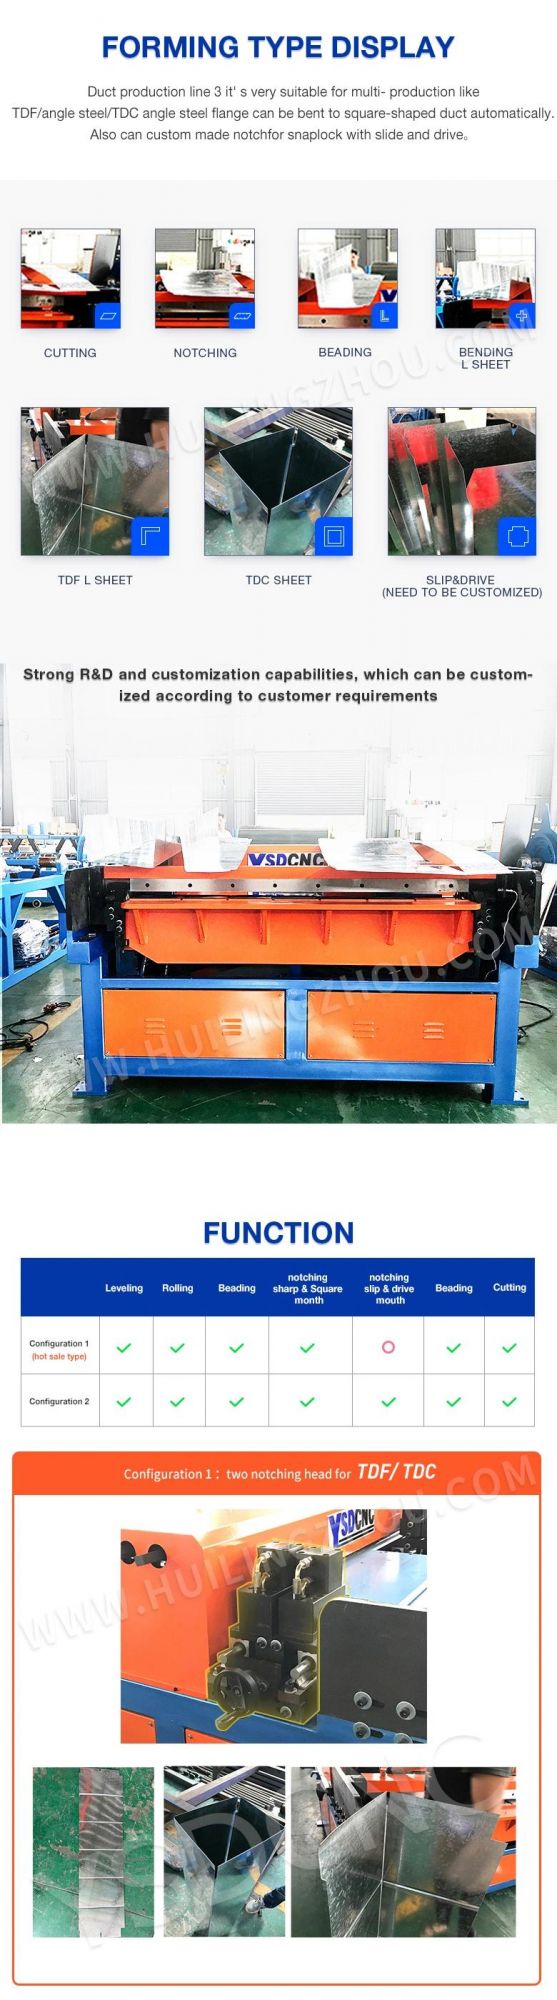 Ysdcnc Brand Square Air Duct Production Line, HVAC Air Duct Forming Line, High=Quality Auto Duct Line 3